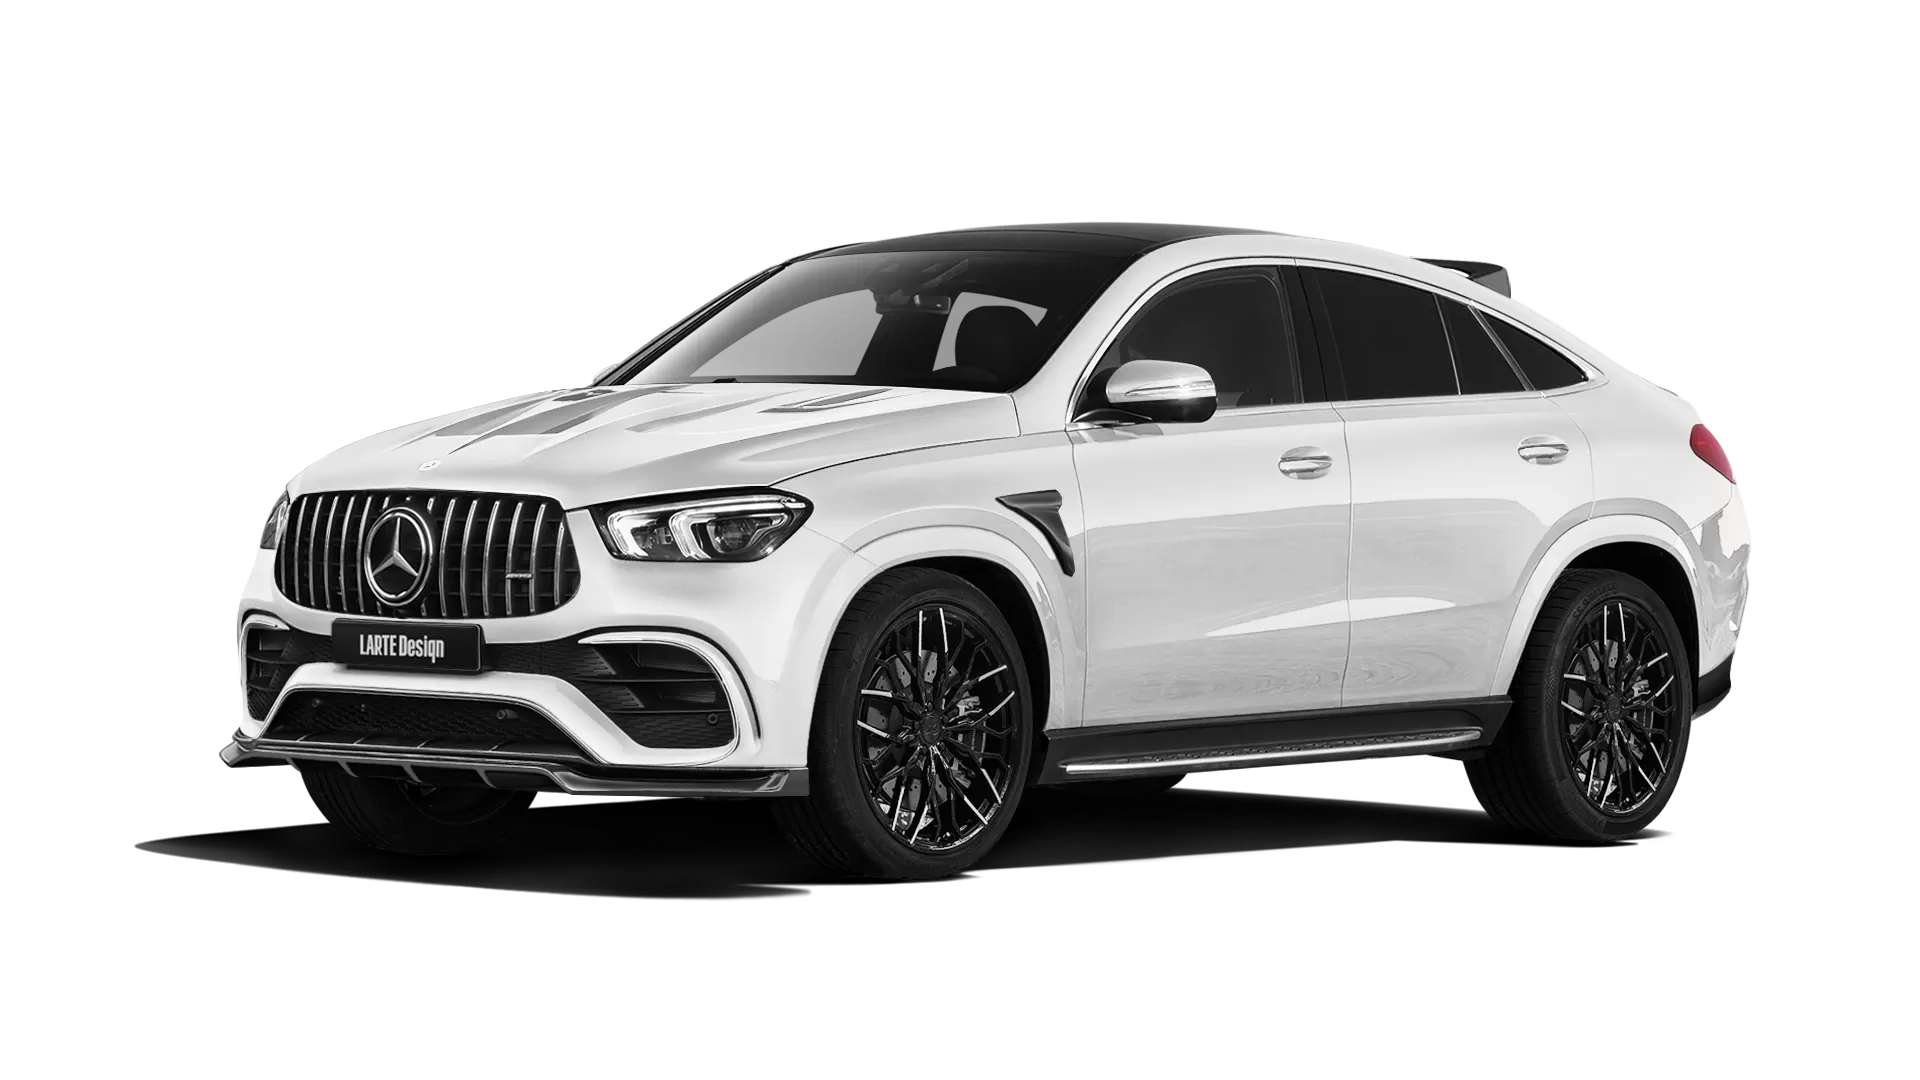 Mercedes GLE Coupe AMG 63 C167 with painted body kit: front view shown in Diamond White